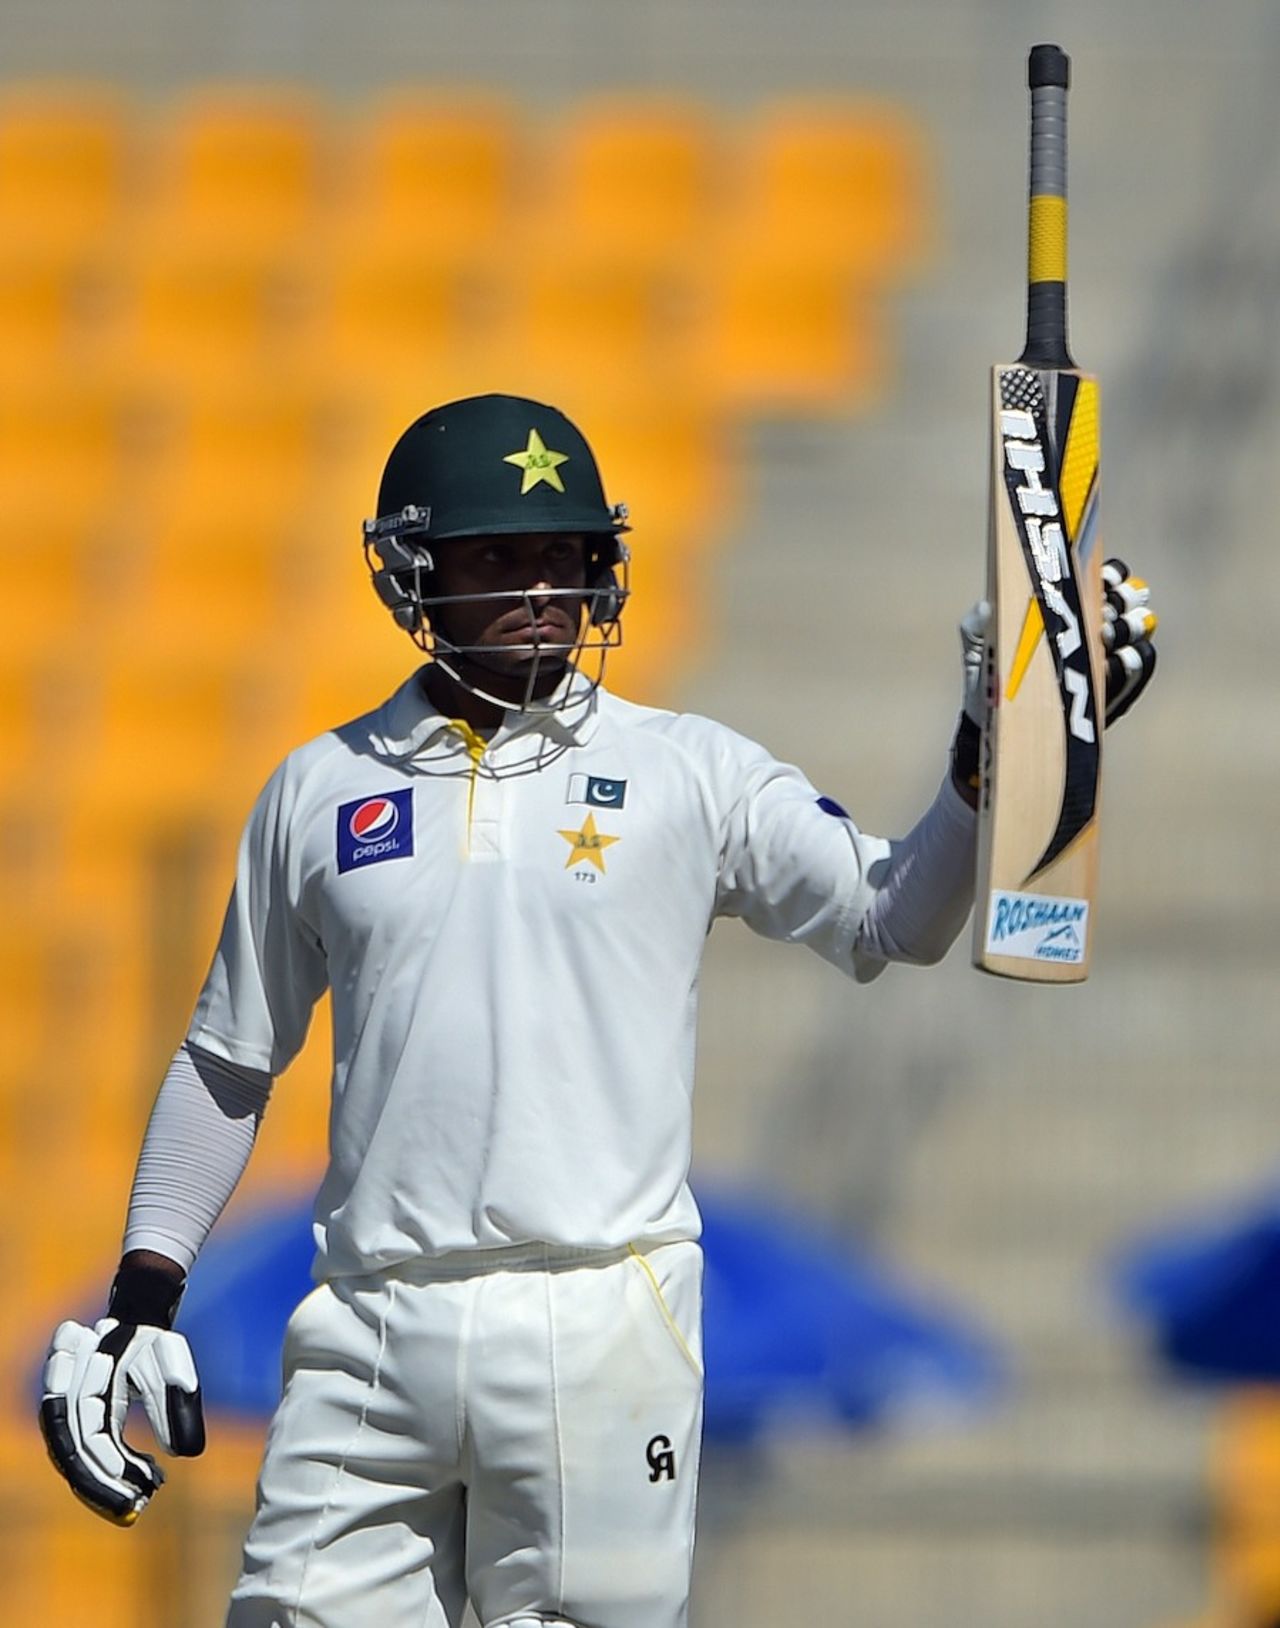 Mohammad Hafeez brings up his fifty, Pakistan v New Zealand, 1st Test, Abu Dhabi, 4th day, November 12, 2014